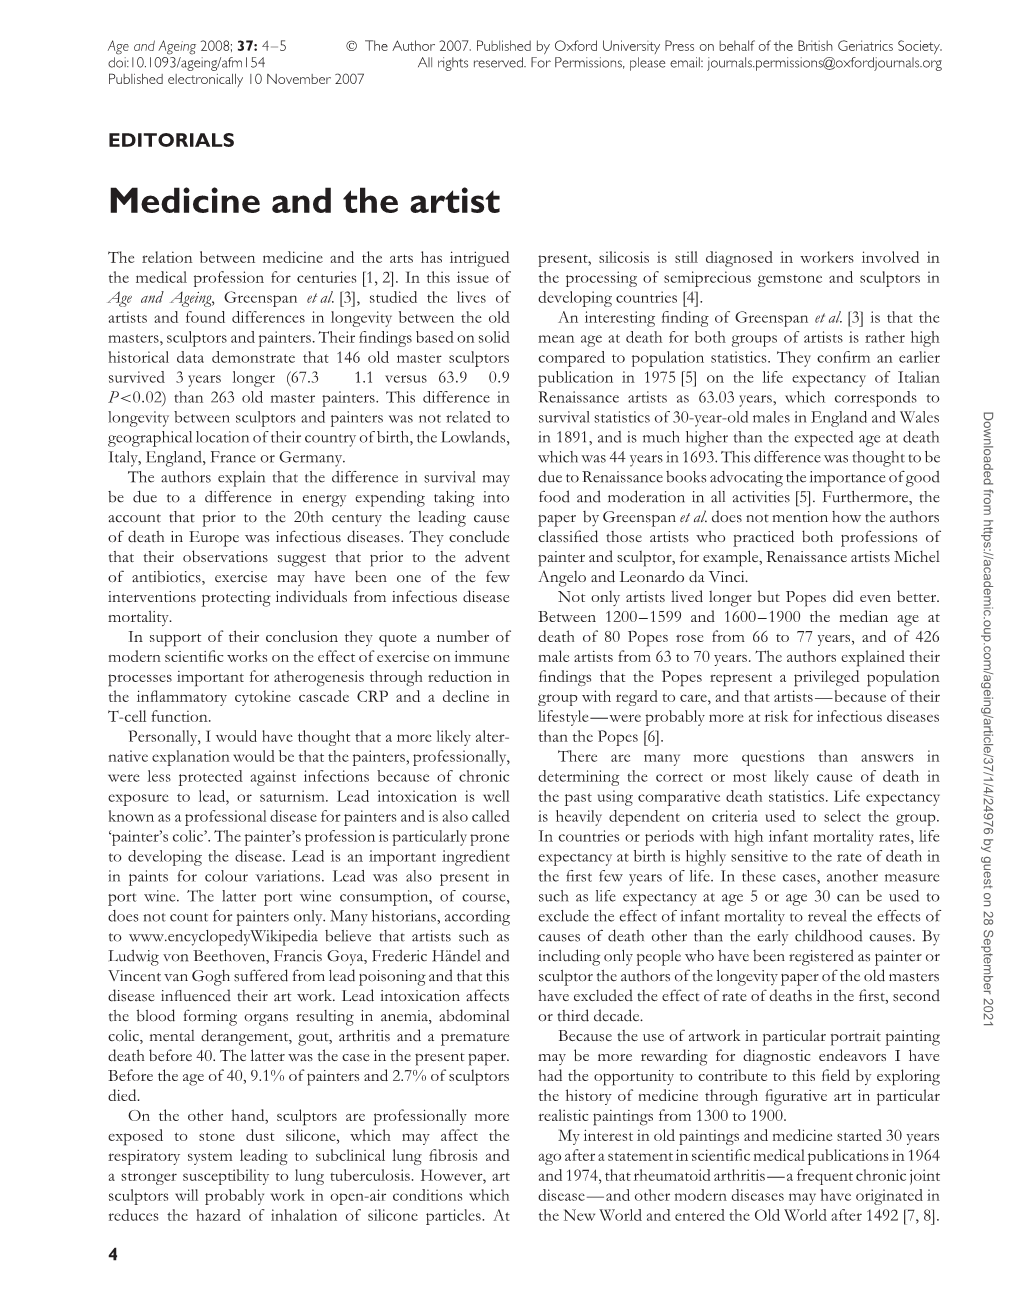 Medicine and the Artist